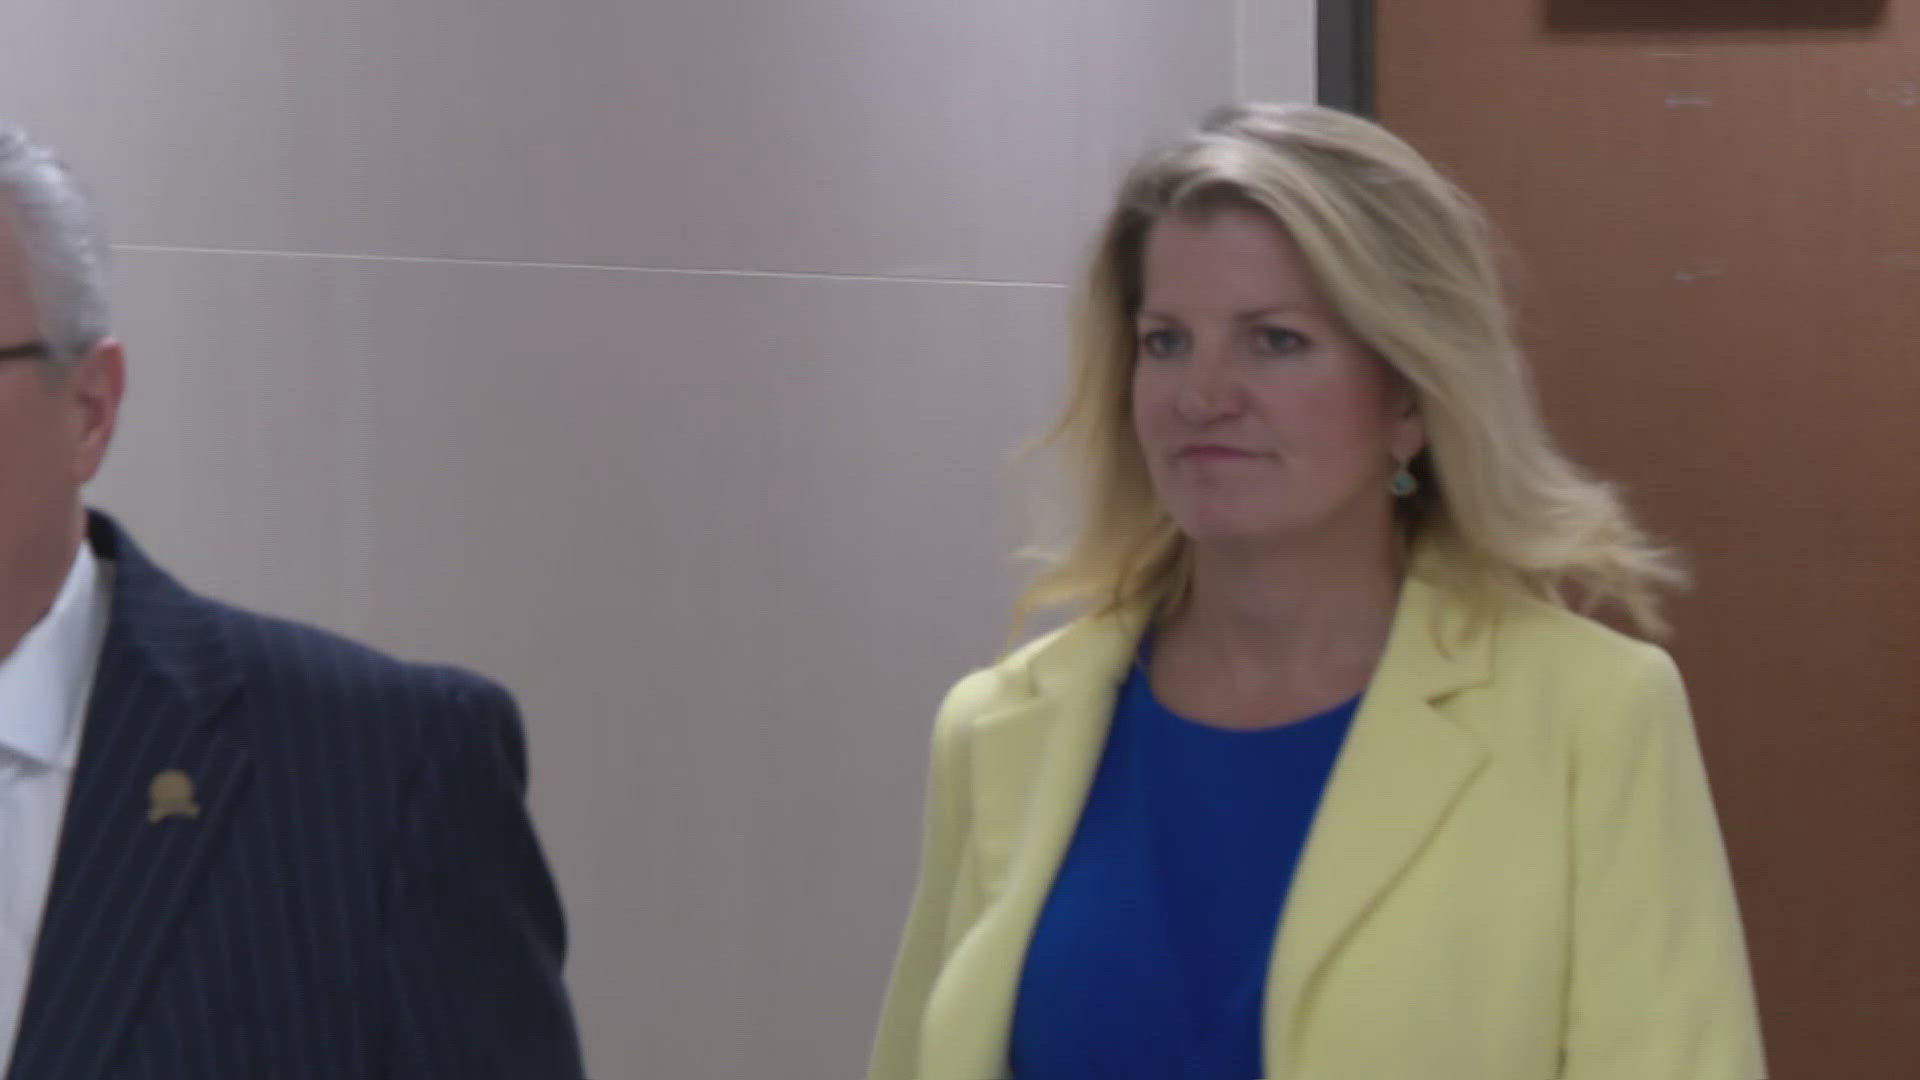 Harris County criminal court Judge Kelli Johnson made her second court appearance Tuesday morning in downtown Houston after being arrested and charged with DWI last